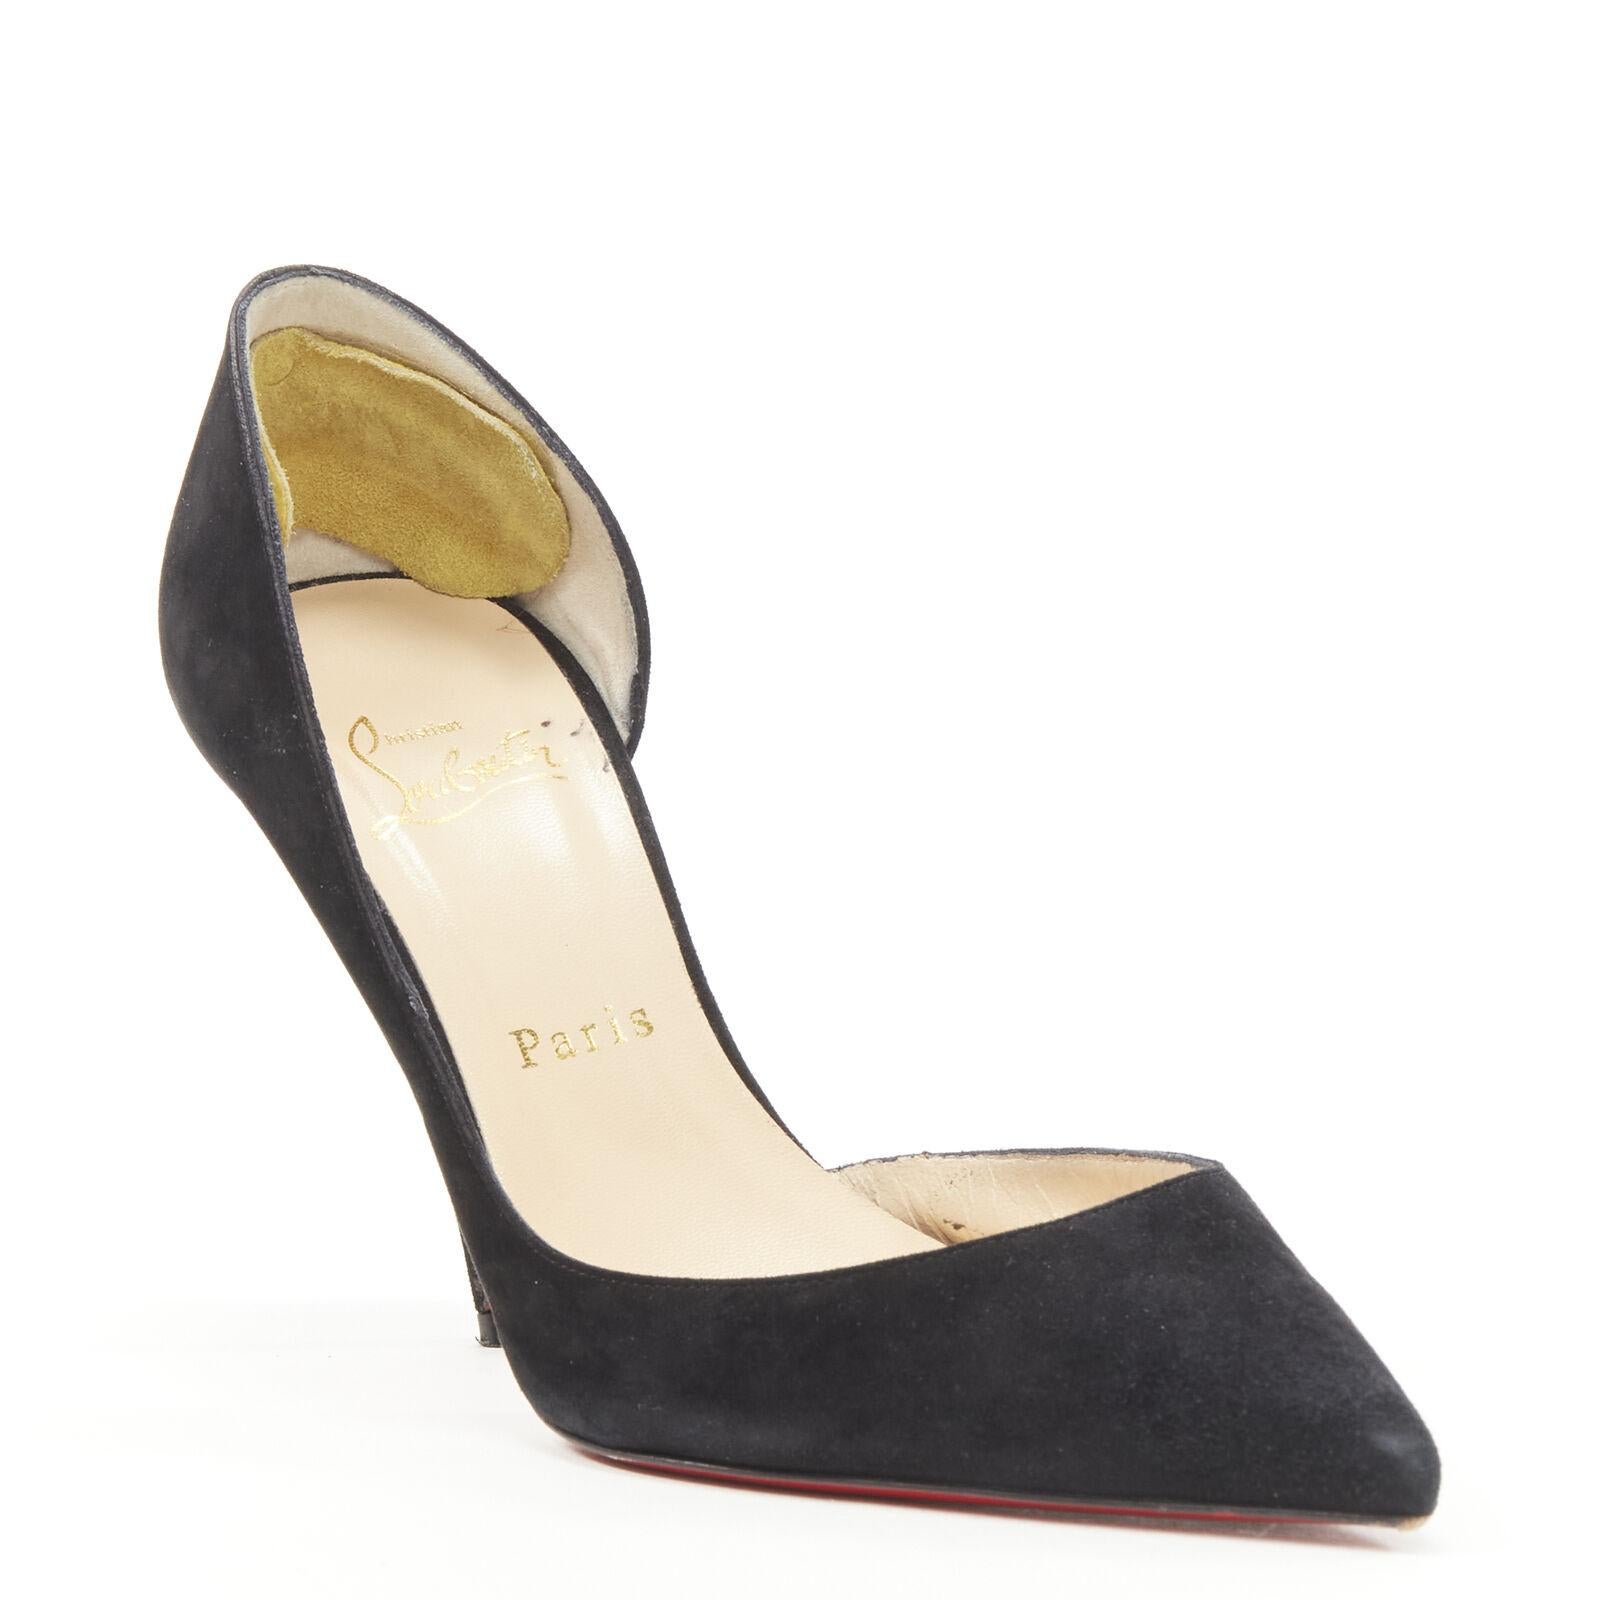 CHRISTIAN LOUBOUTIN Iriza 100 black suede dorsay stiletto pump EU38
Reference: KEDG/A00127
Brand: Christian Louboutin
Model: Iriza 100
Material: Suede
Color: Black
Pattern: Solid
Lining: Leather
Extra Details: Dorsay pump.
Made in: